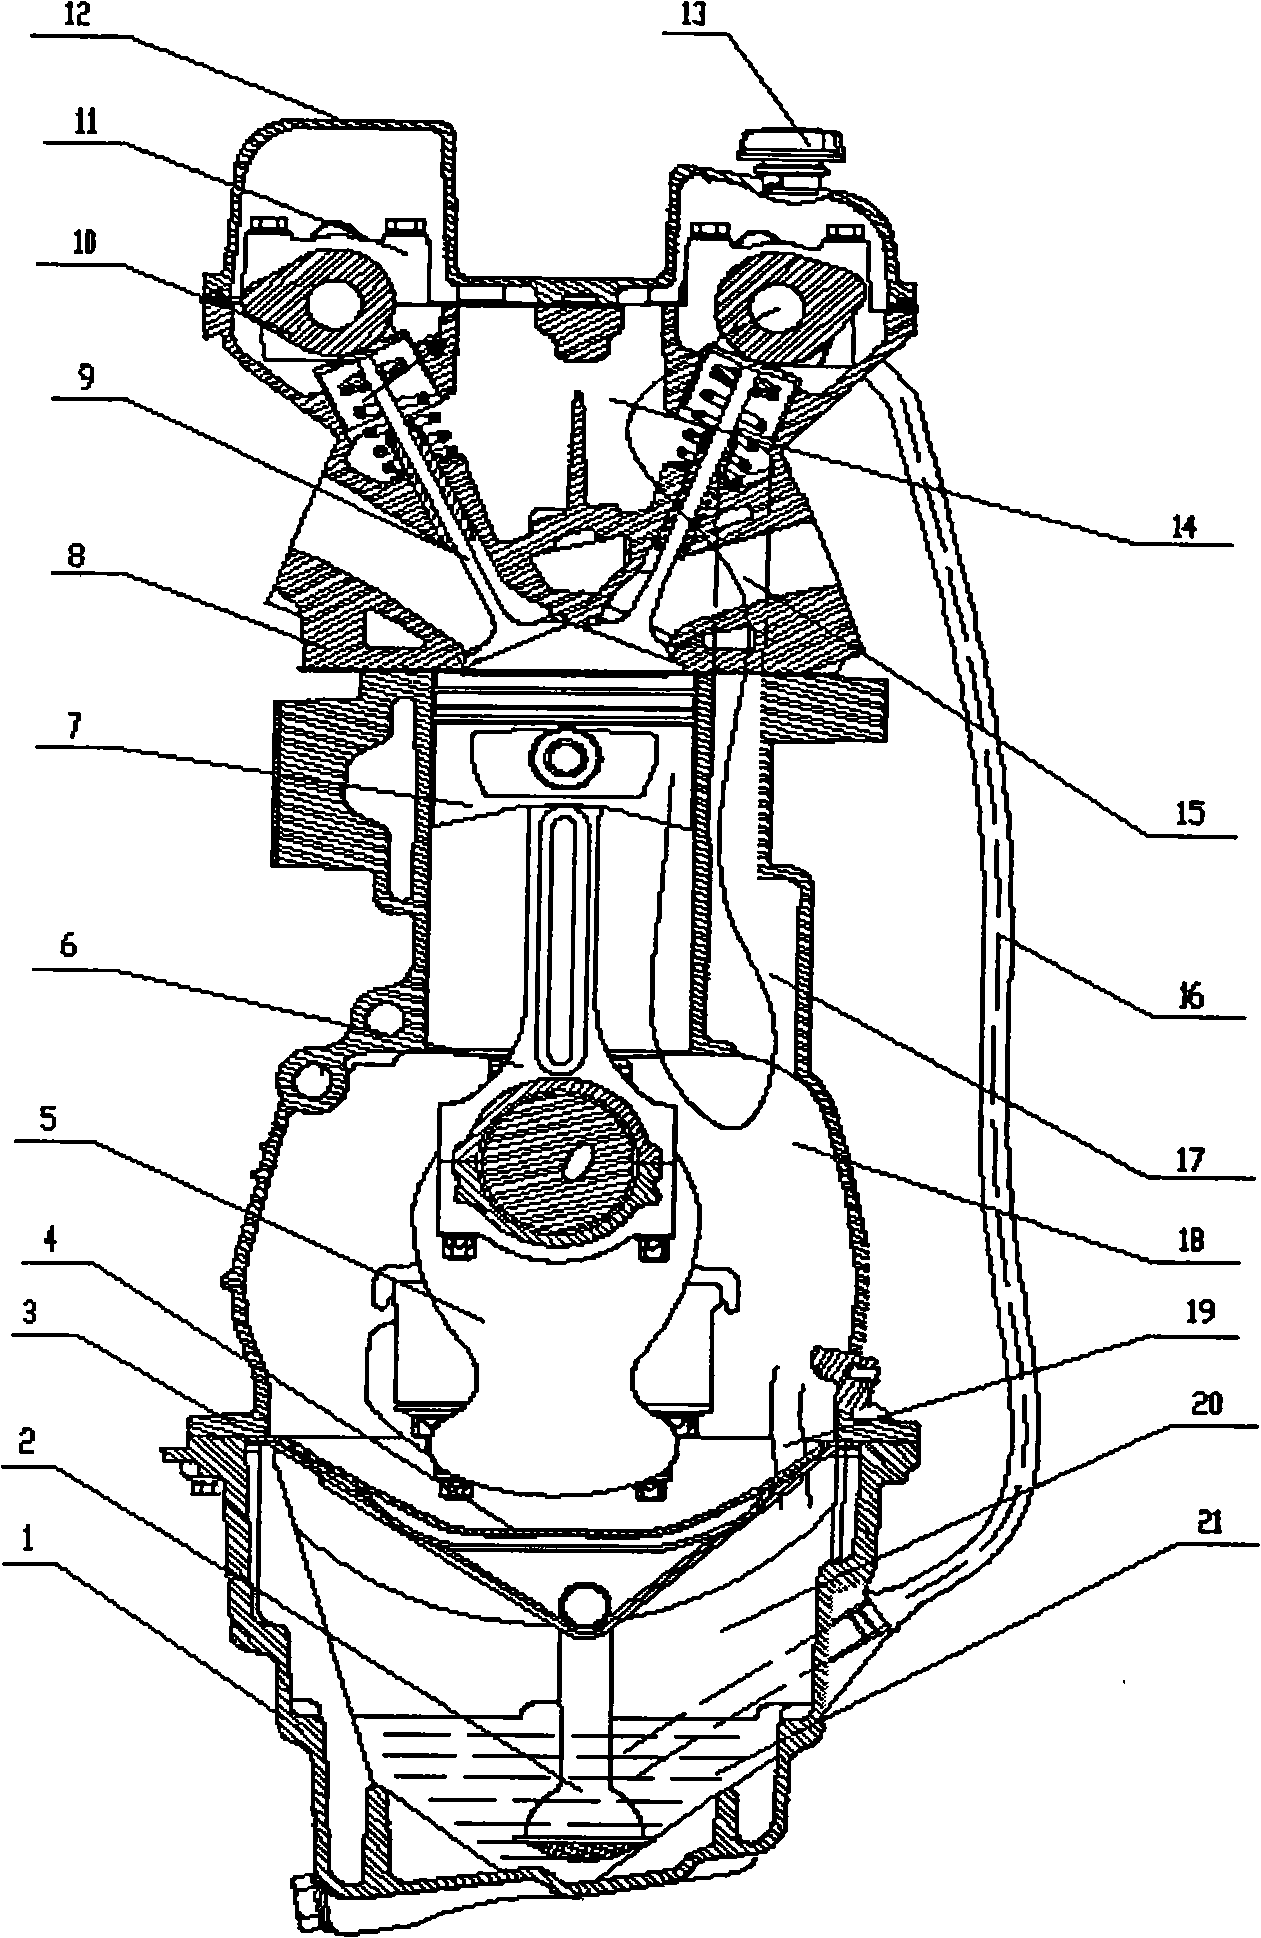 Gas oil separation structure of internal combustion engine crankcase ventilation system